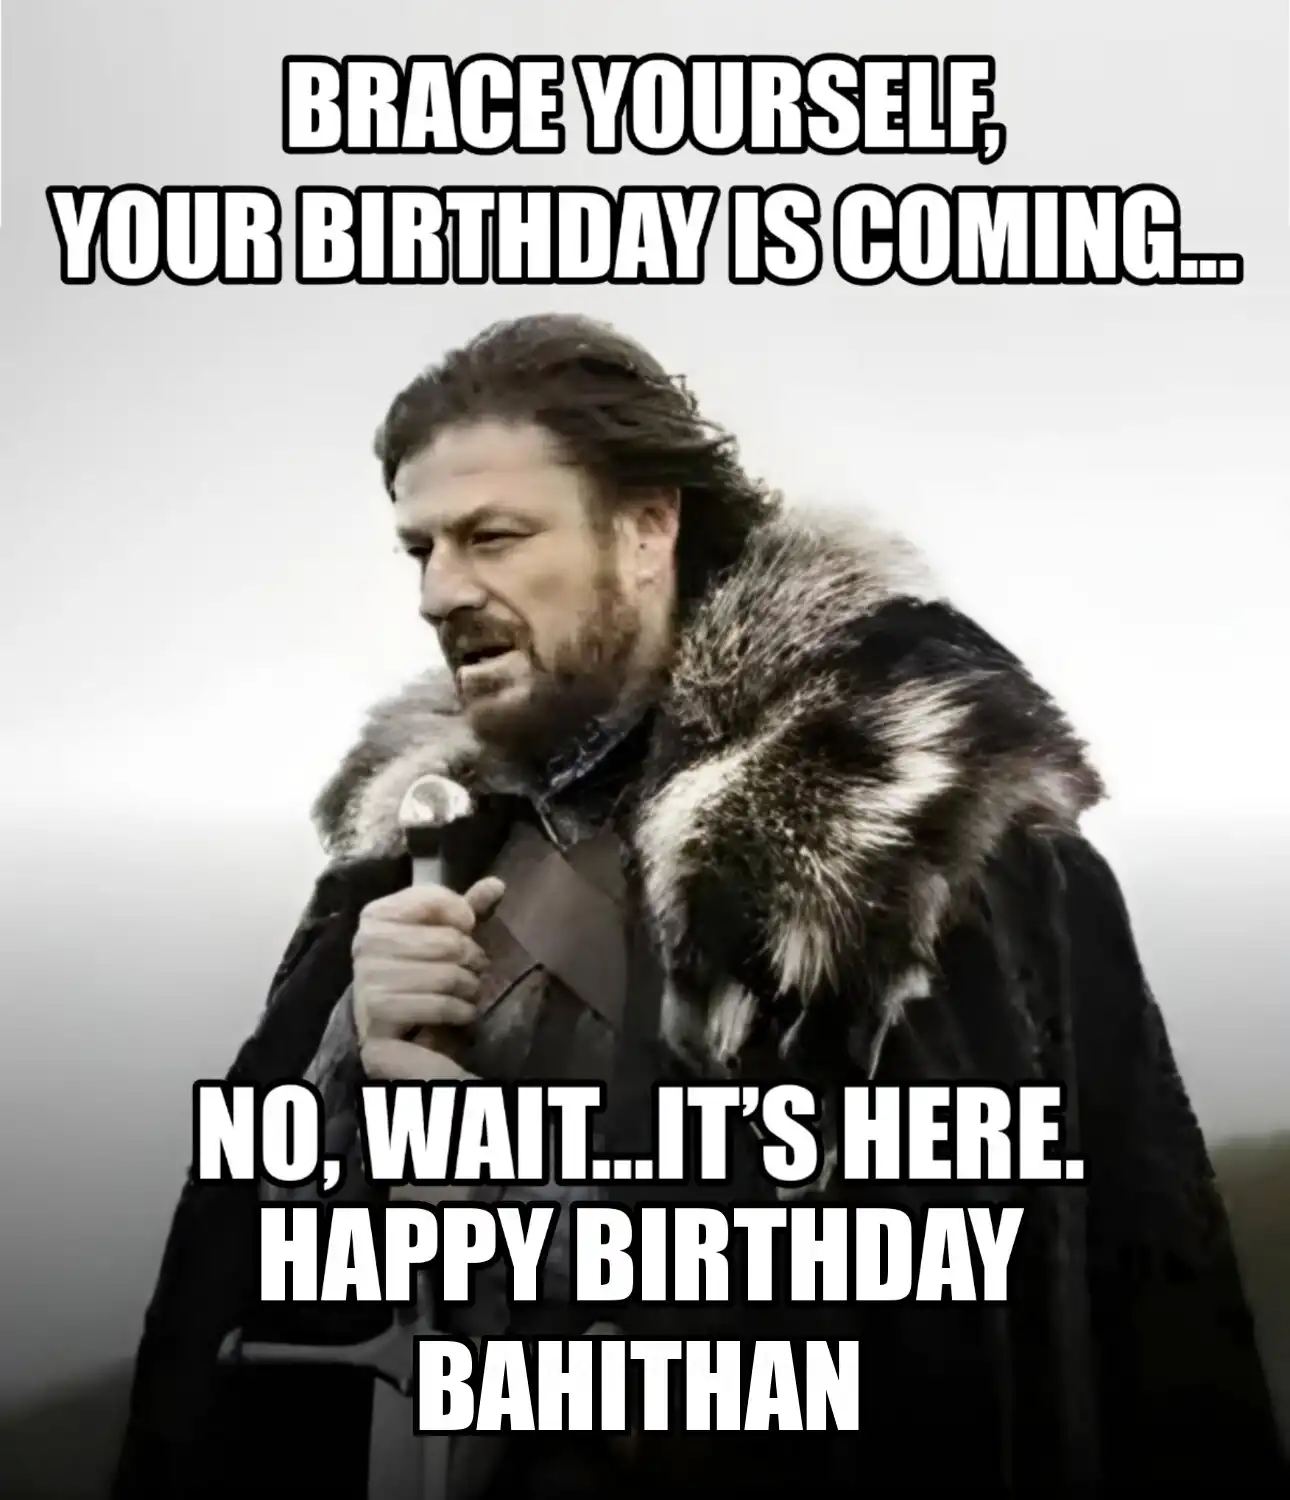 Happy Birthday Bahithan Brace Yourself Your Birthday Is Coming Meme